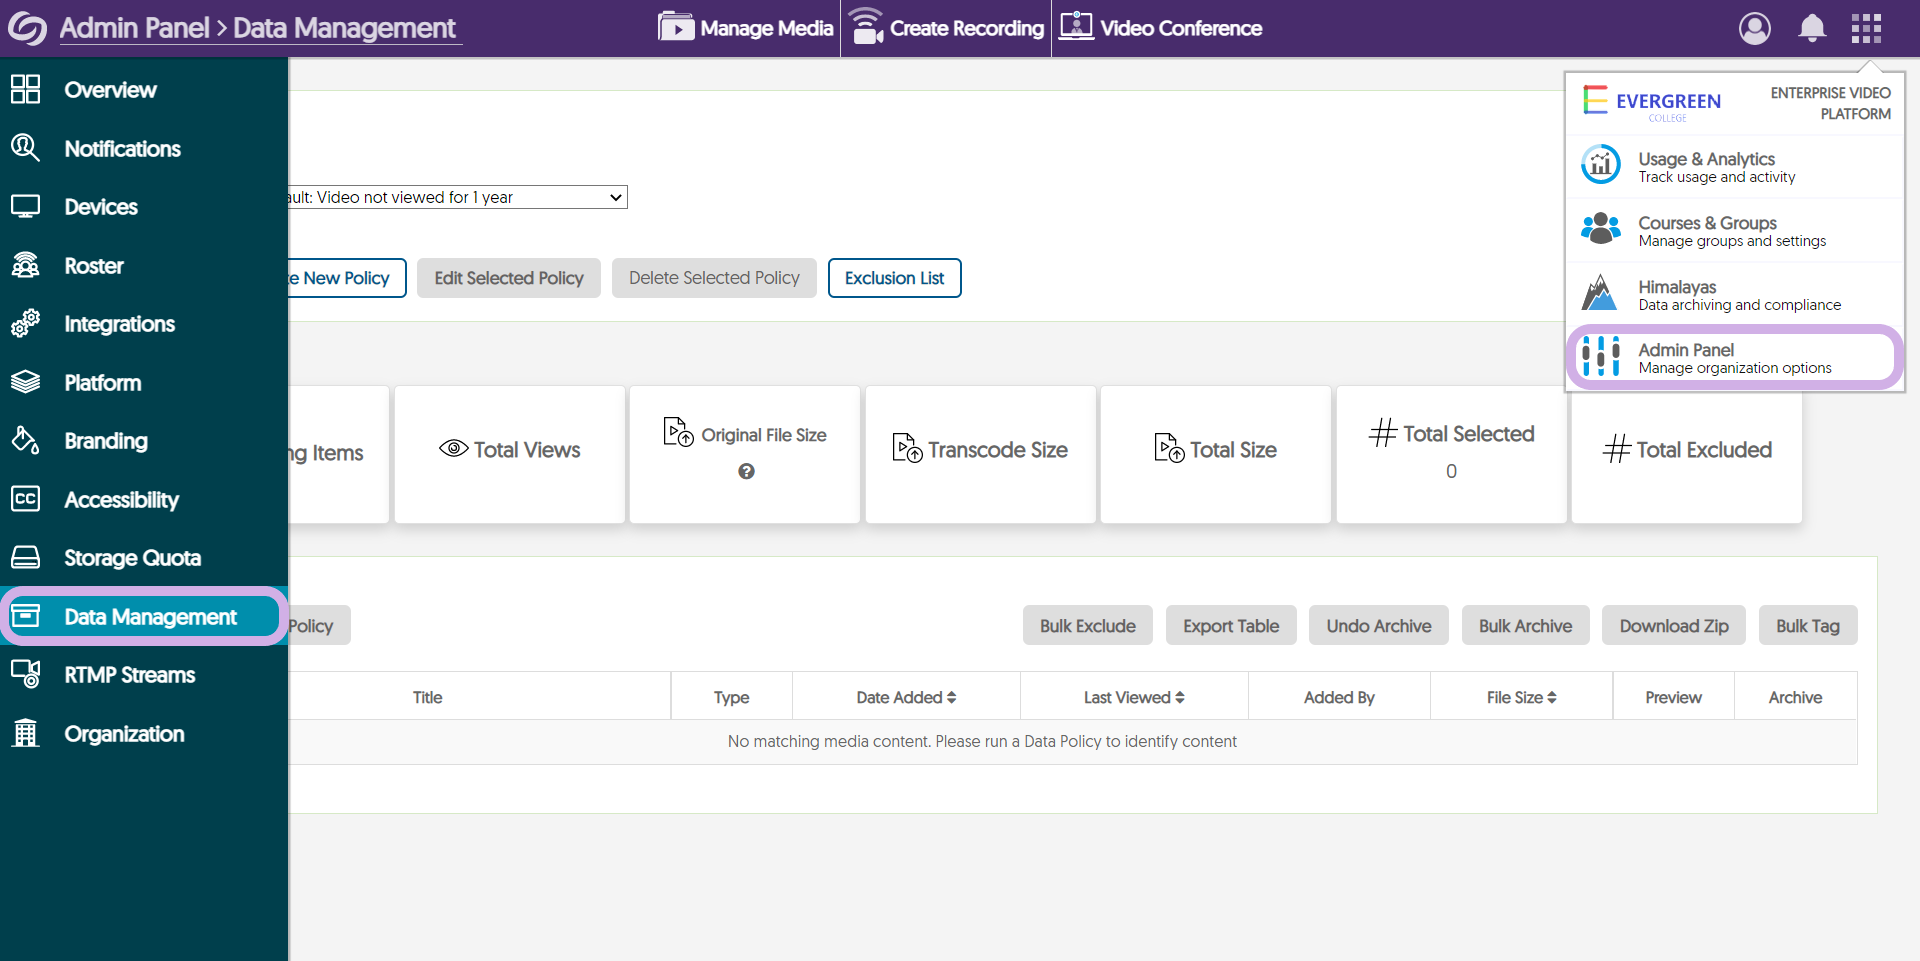 The Admin Panel tab is highlighted, along with the Data Management tab on the Data Management page.